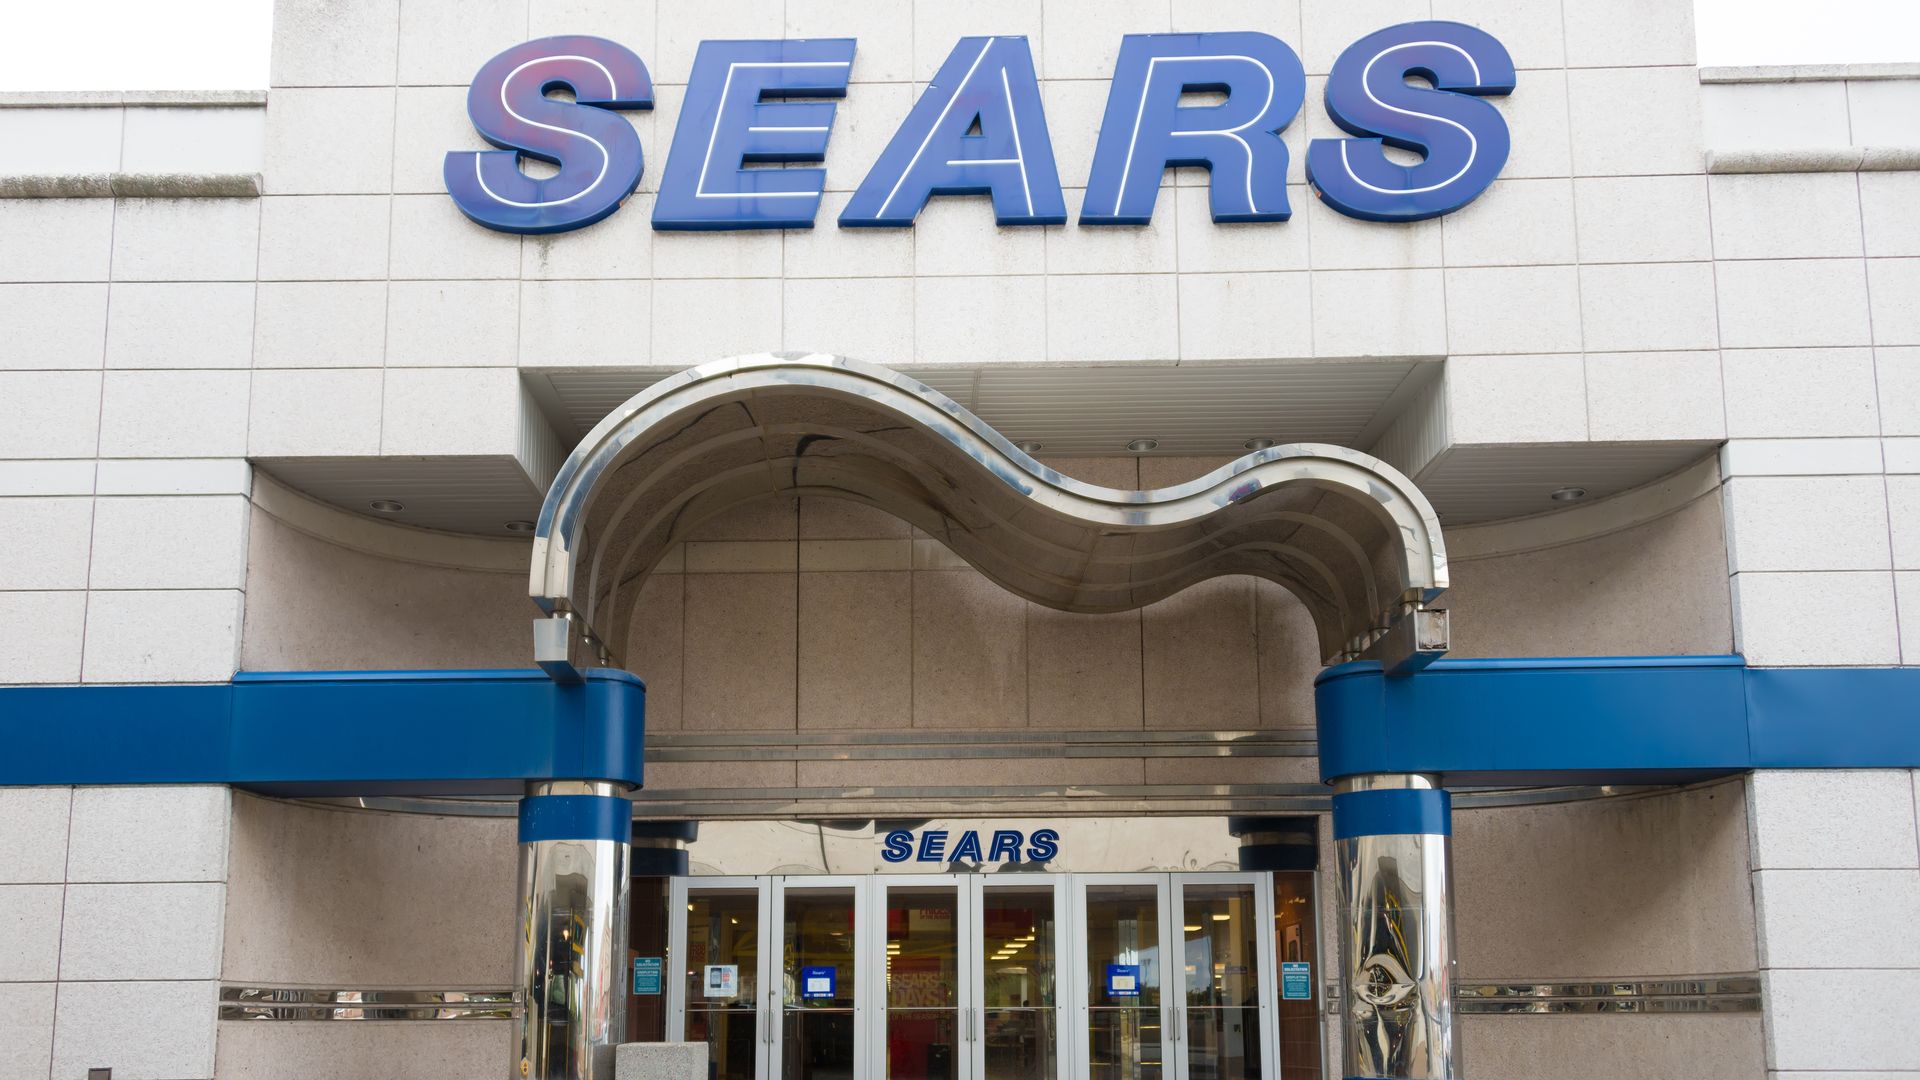 The exterior of a Sears department store.